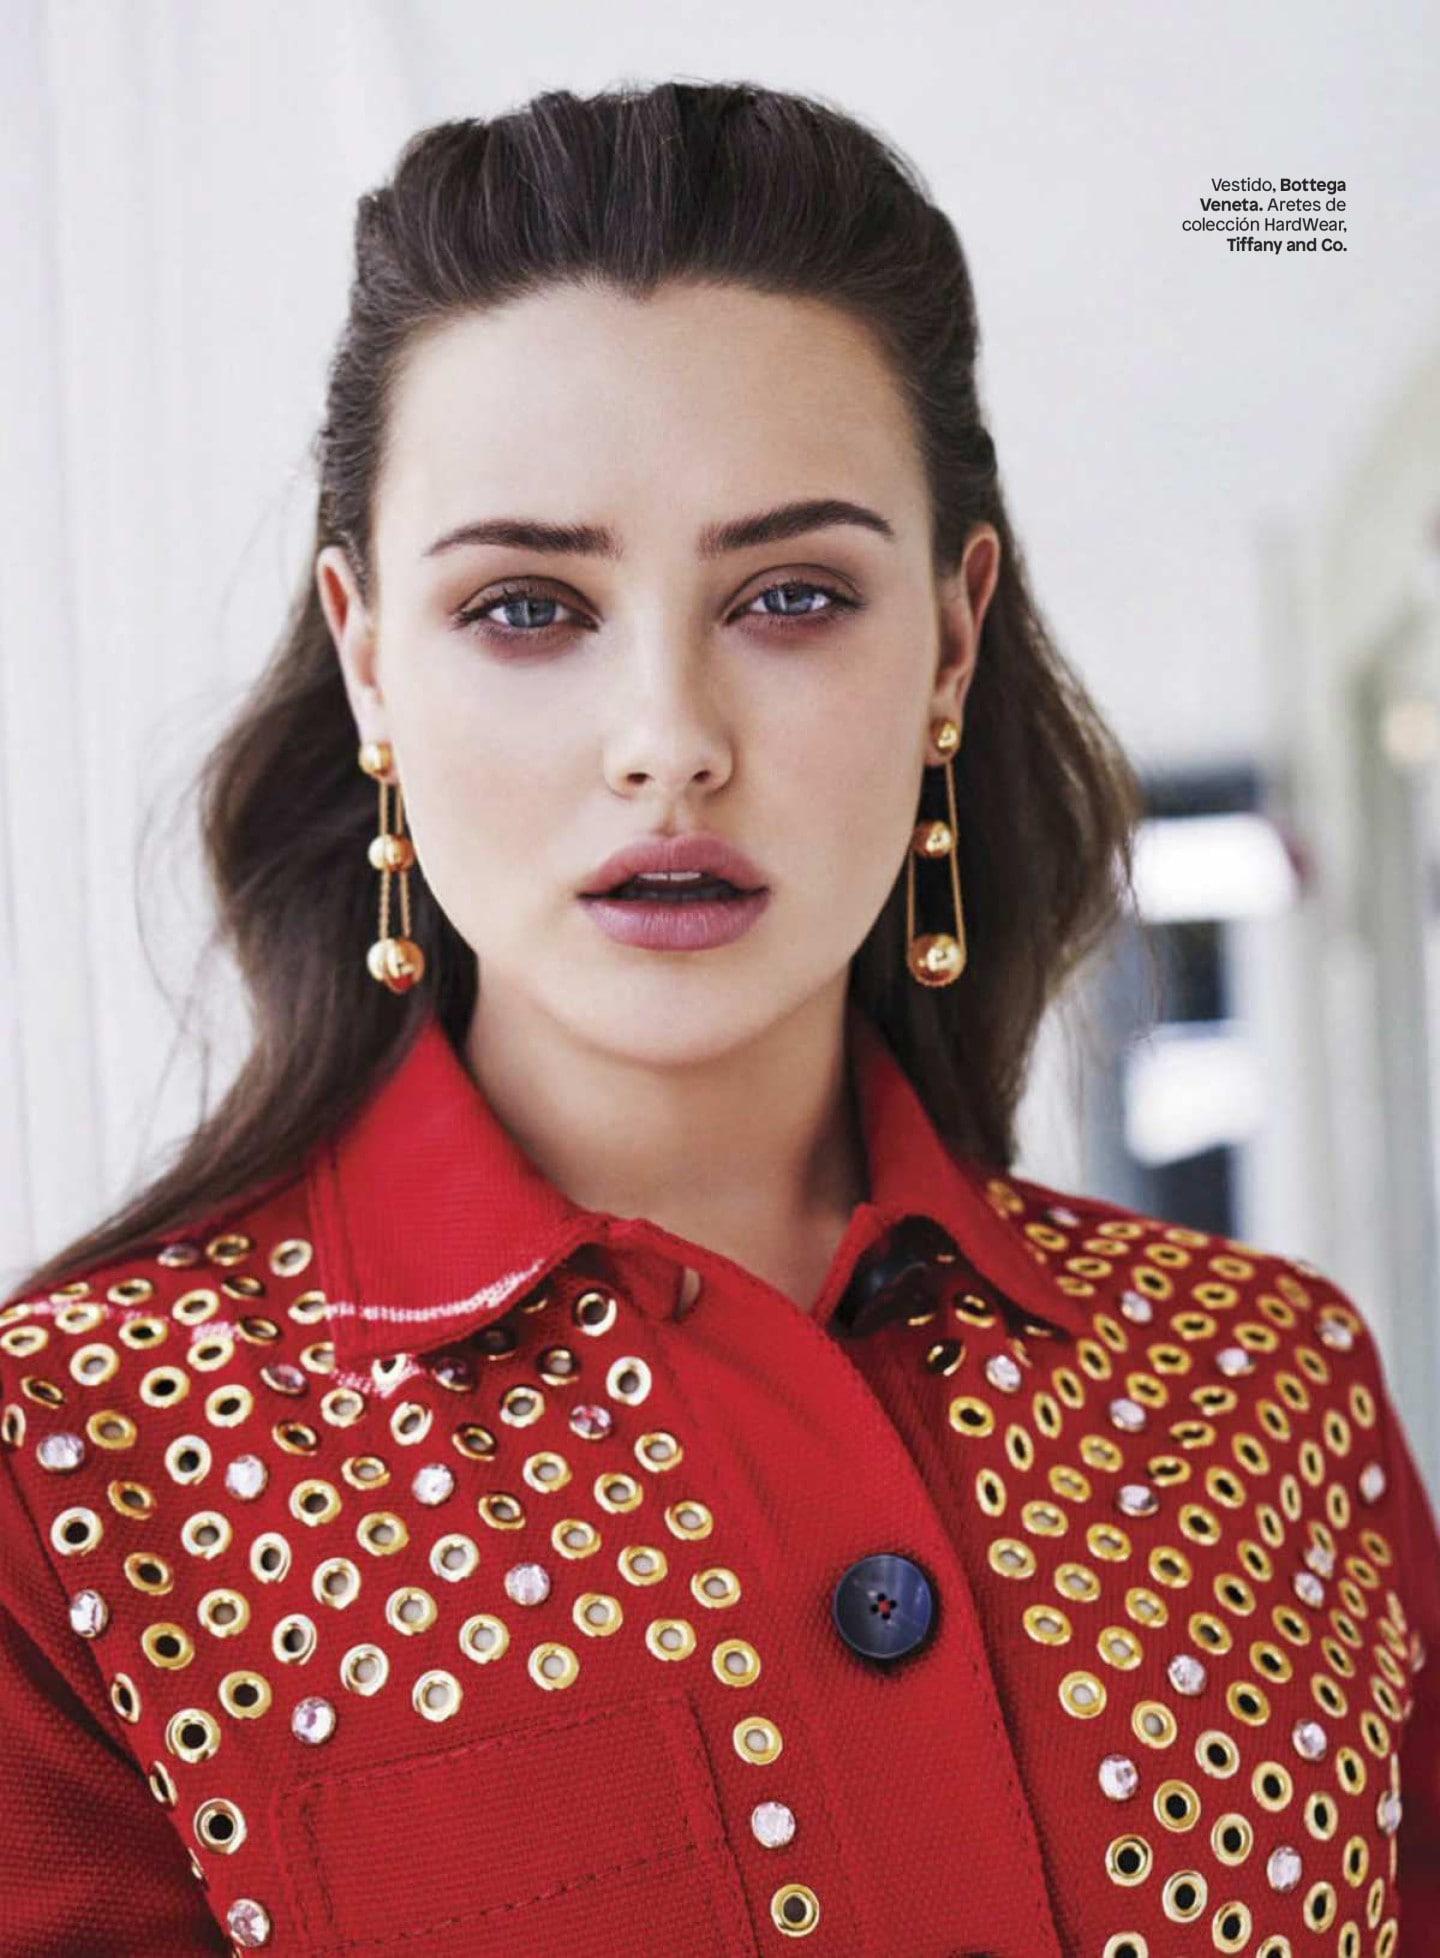 61 Hottest Katherine Langford Butt Pictures Are Too Damn Delicious To Watch | Best Of Comic Books